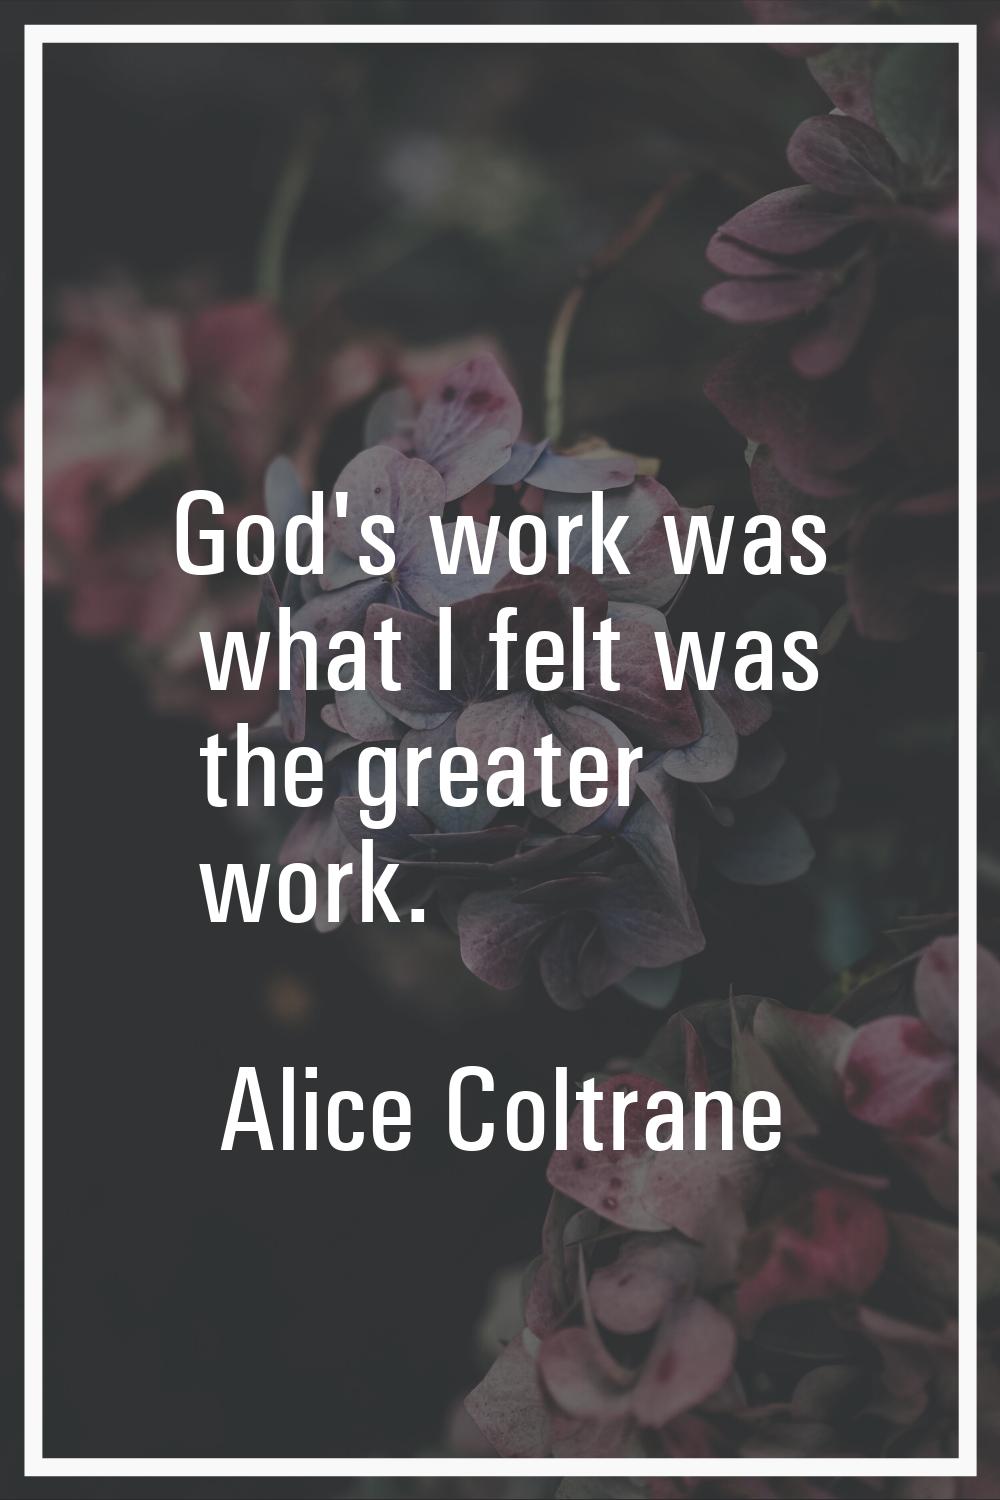 God's work was what I felt was the greater work.